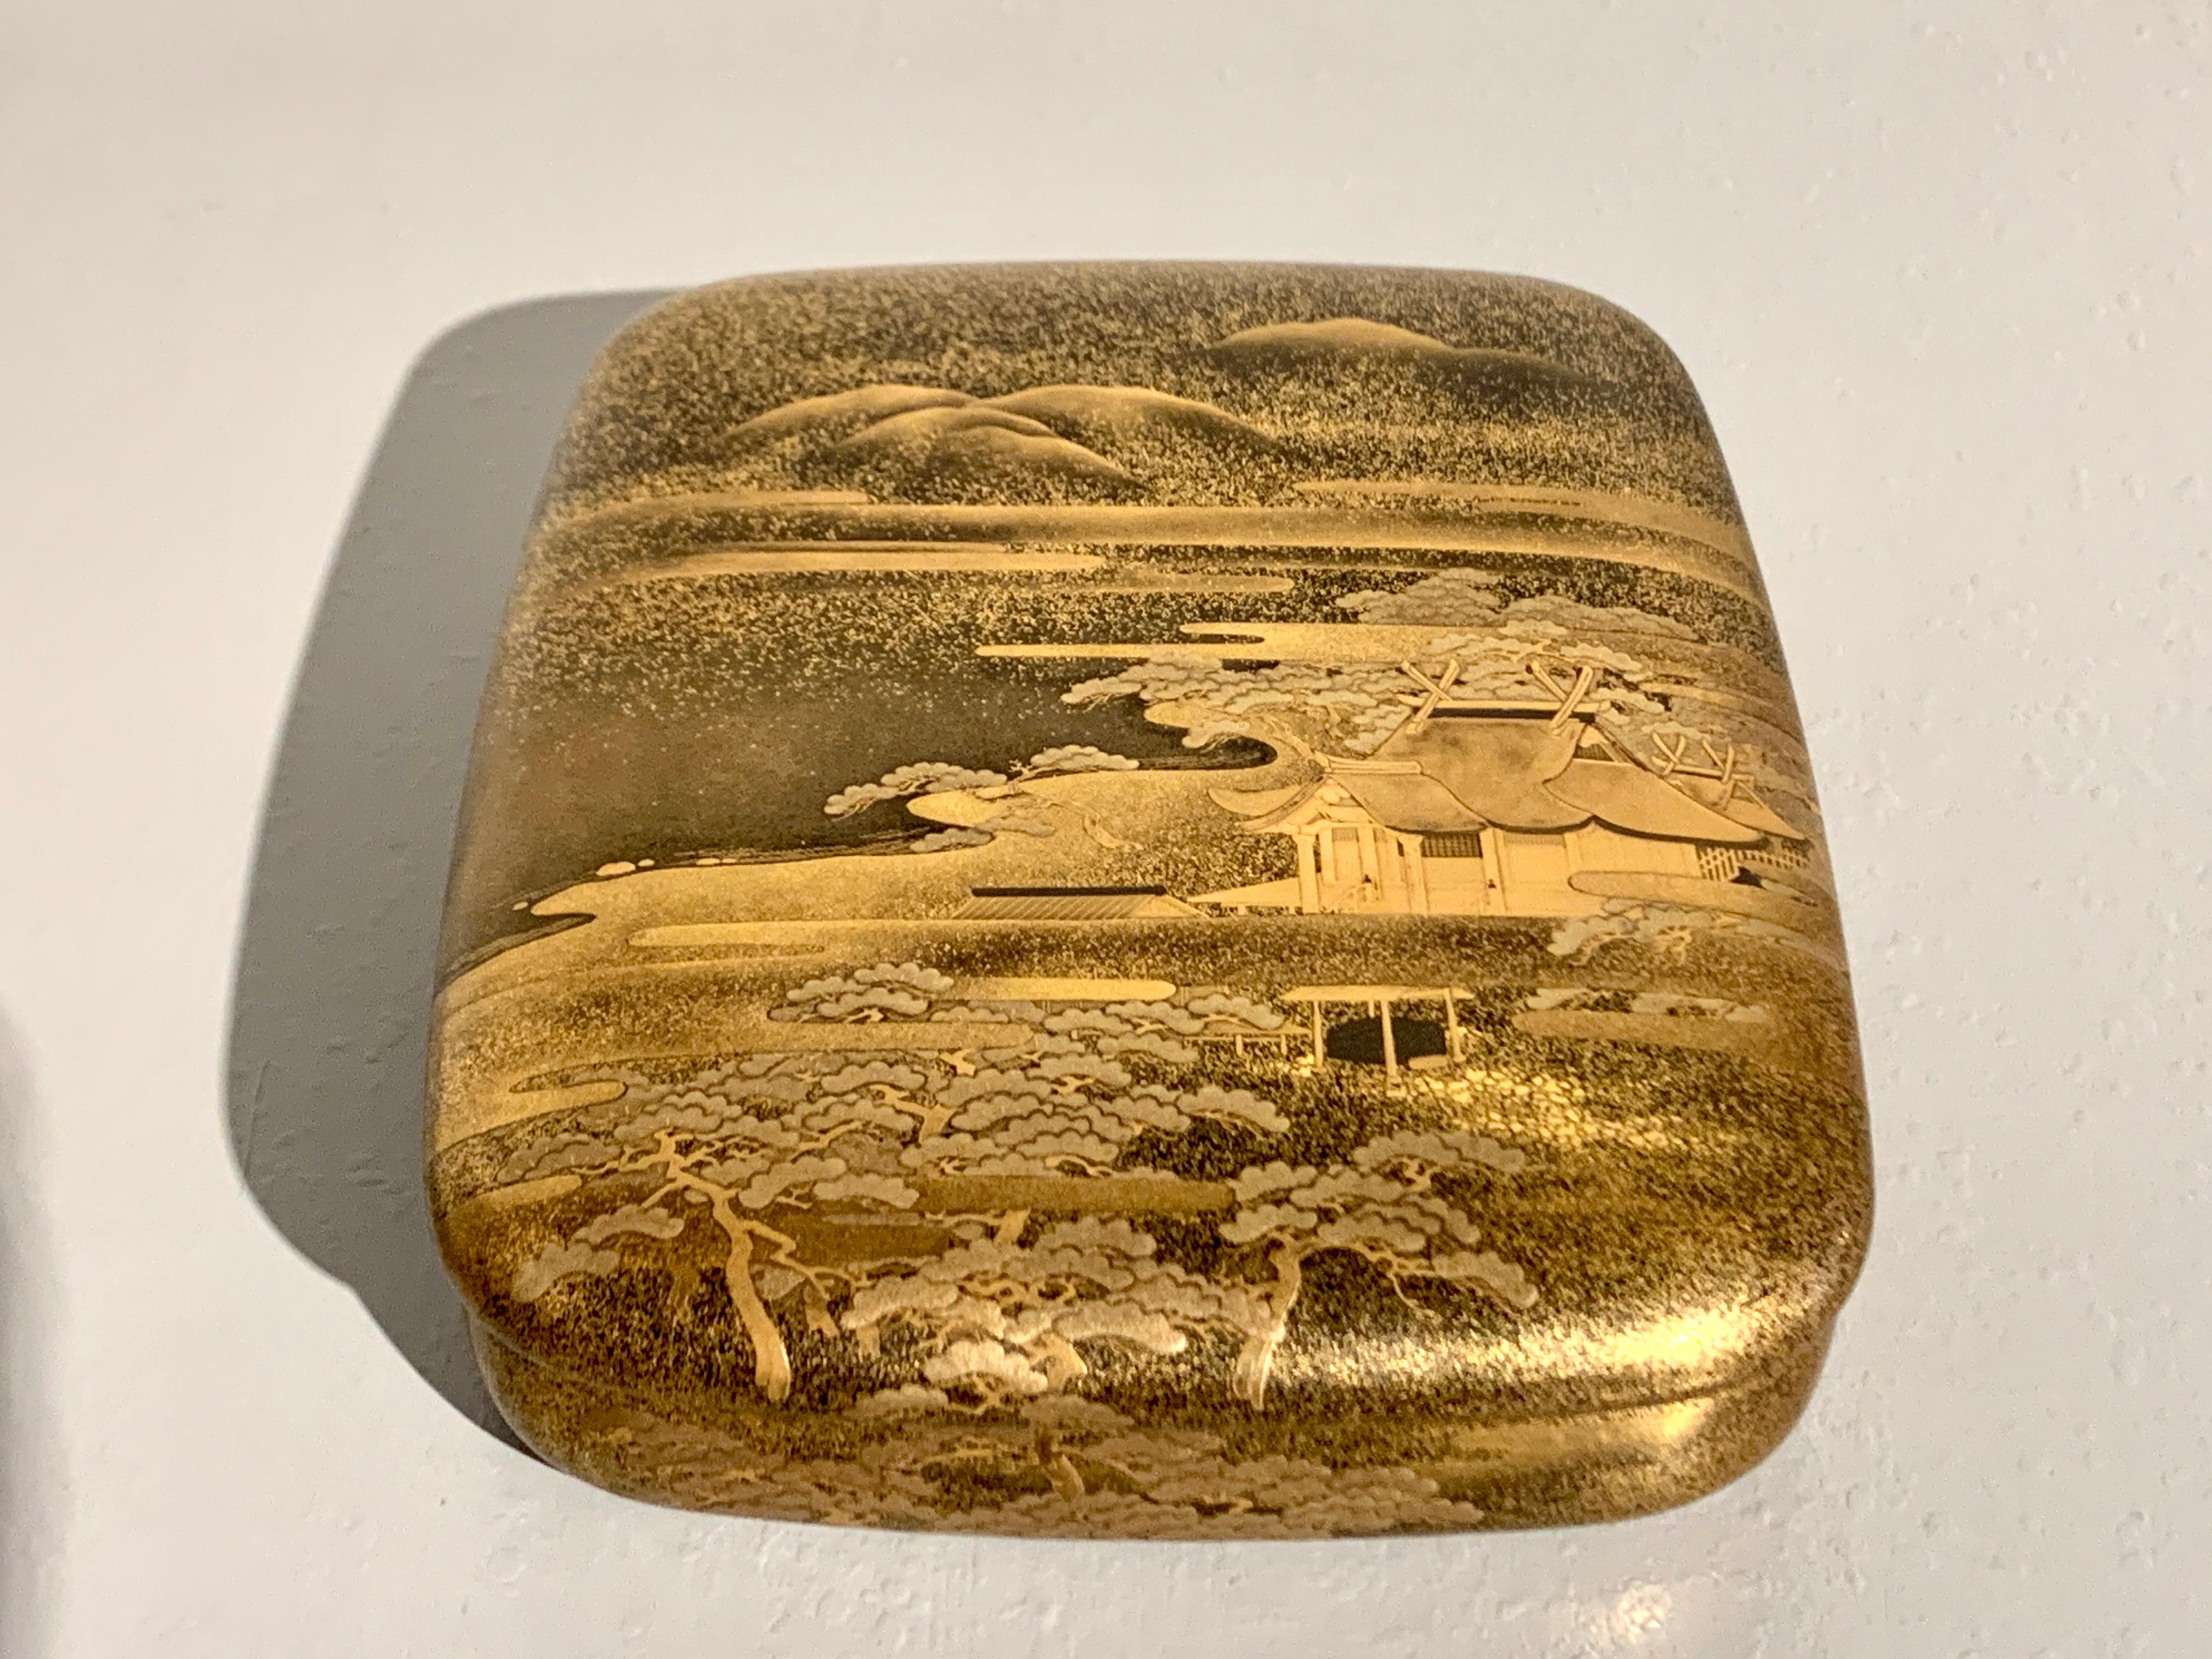 A fine and elegant Japanese lacquer box for writing implements or stationery, suzuribako, with an image of a Shinto shrine, Edo Period, mid-19th century, circa 1840, Japan.

The exquisite suzuribako features rounded corners and a slightly domed,